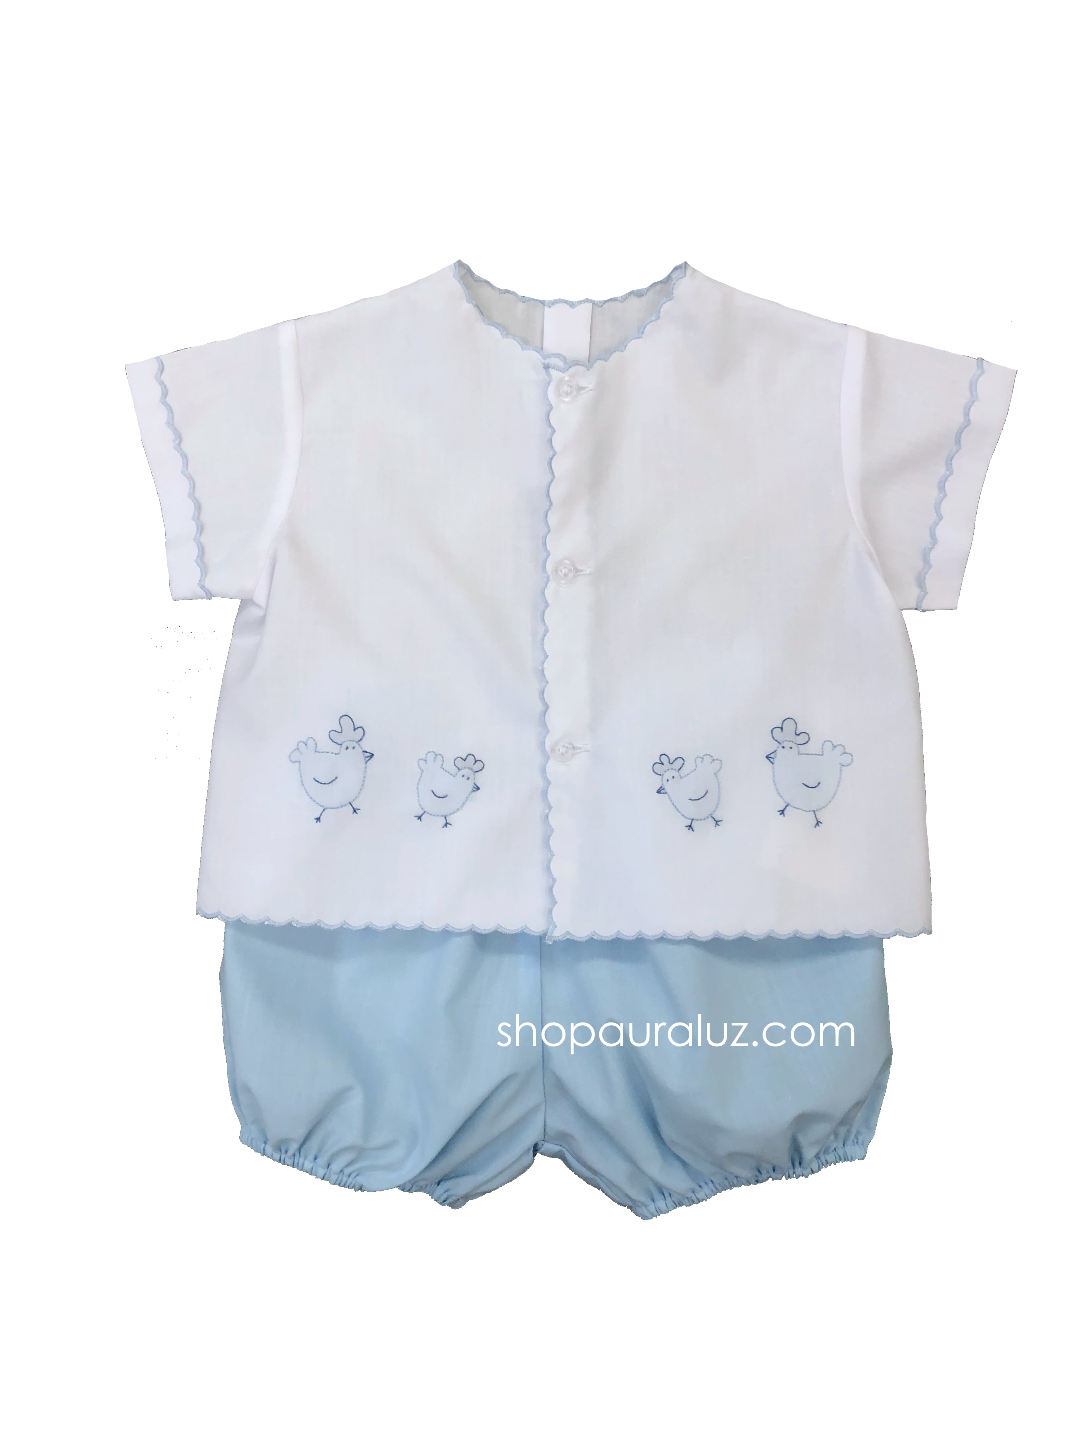 Auraluz Diaper shirt/bloomer set...White with blue scallops(blue bloomers) and embroidered chickens